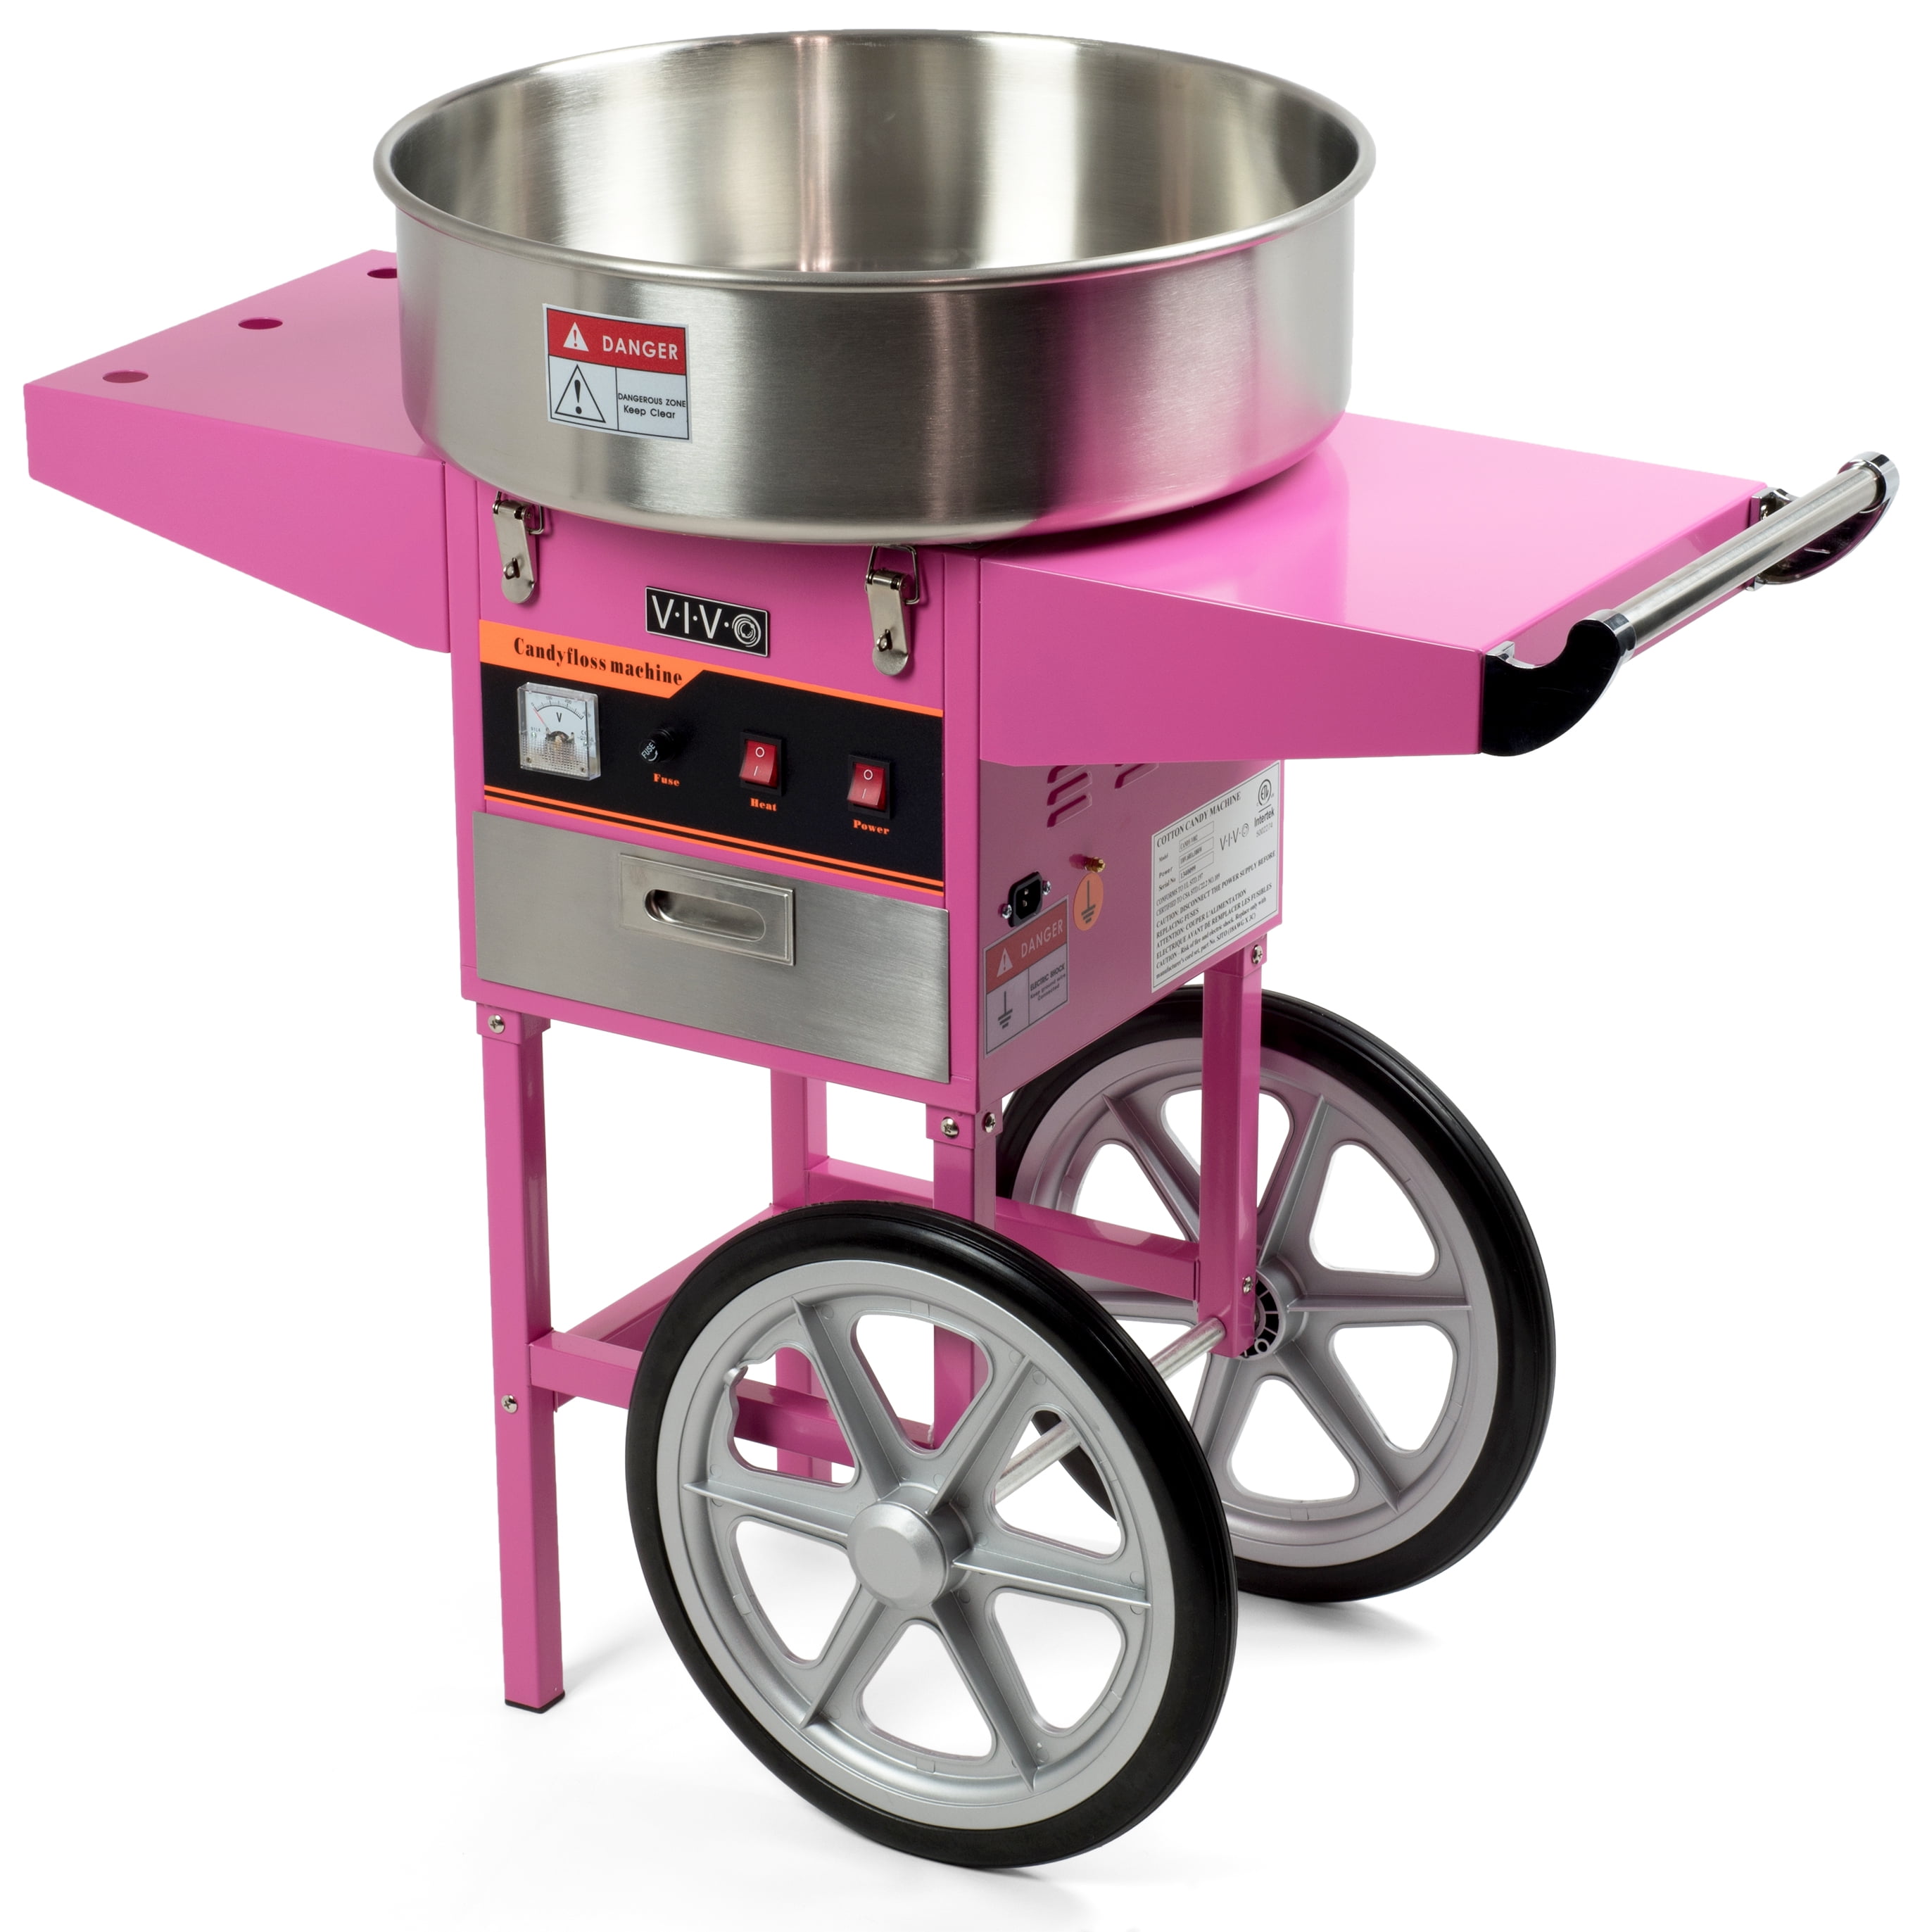 Details about  / Electric Commercial Cotton Candy Machine Cotton Candy Floss Maker Cart Stand USA